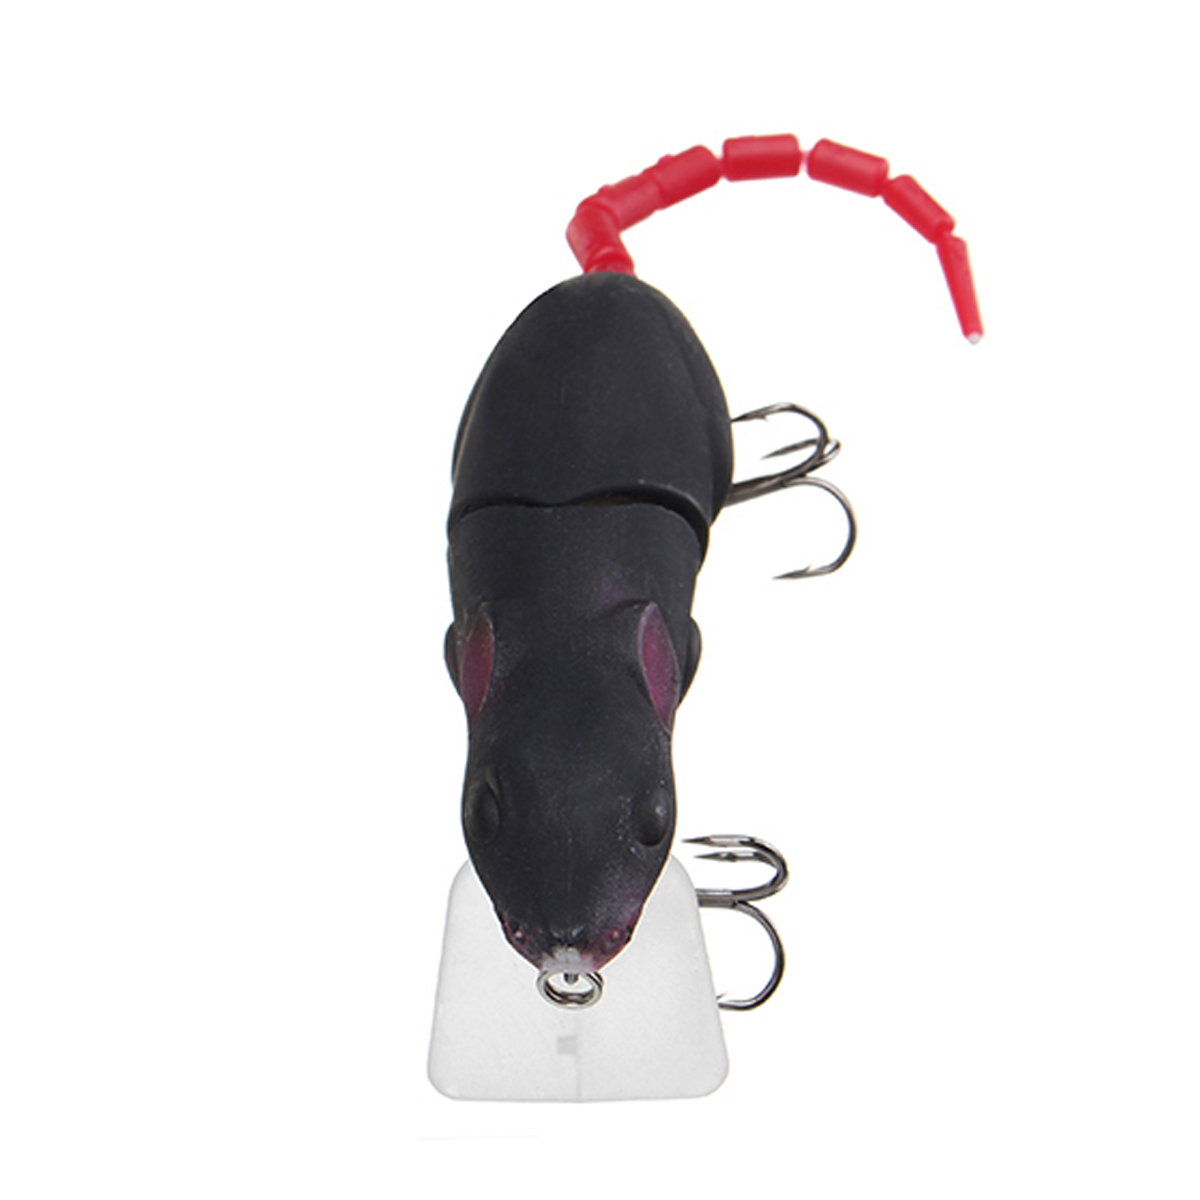 25cm-155g-Jointed-Rat-Fishing-Lure-Mouse-Floating-Crankbait-Sea-Topwater-3D-Eyes-Artificial-Baits-1354966-9